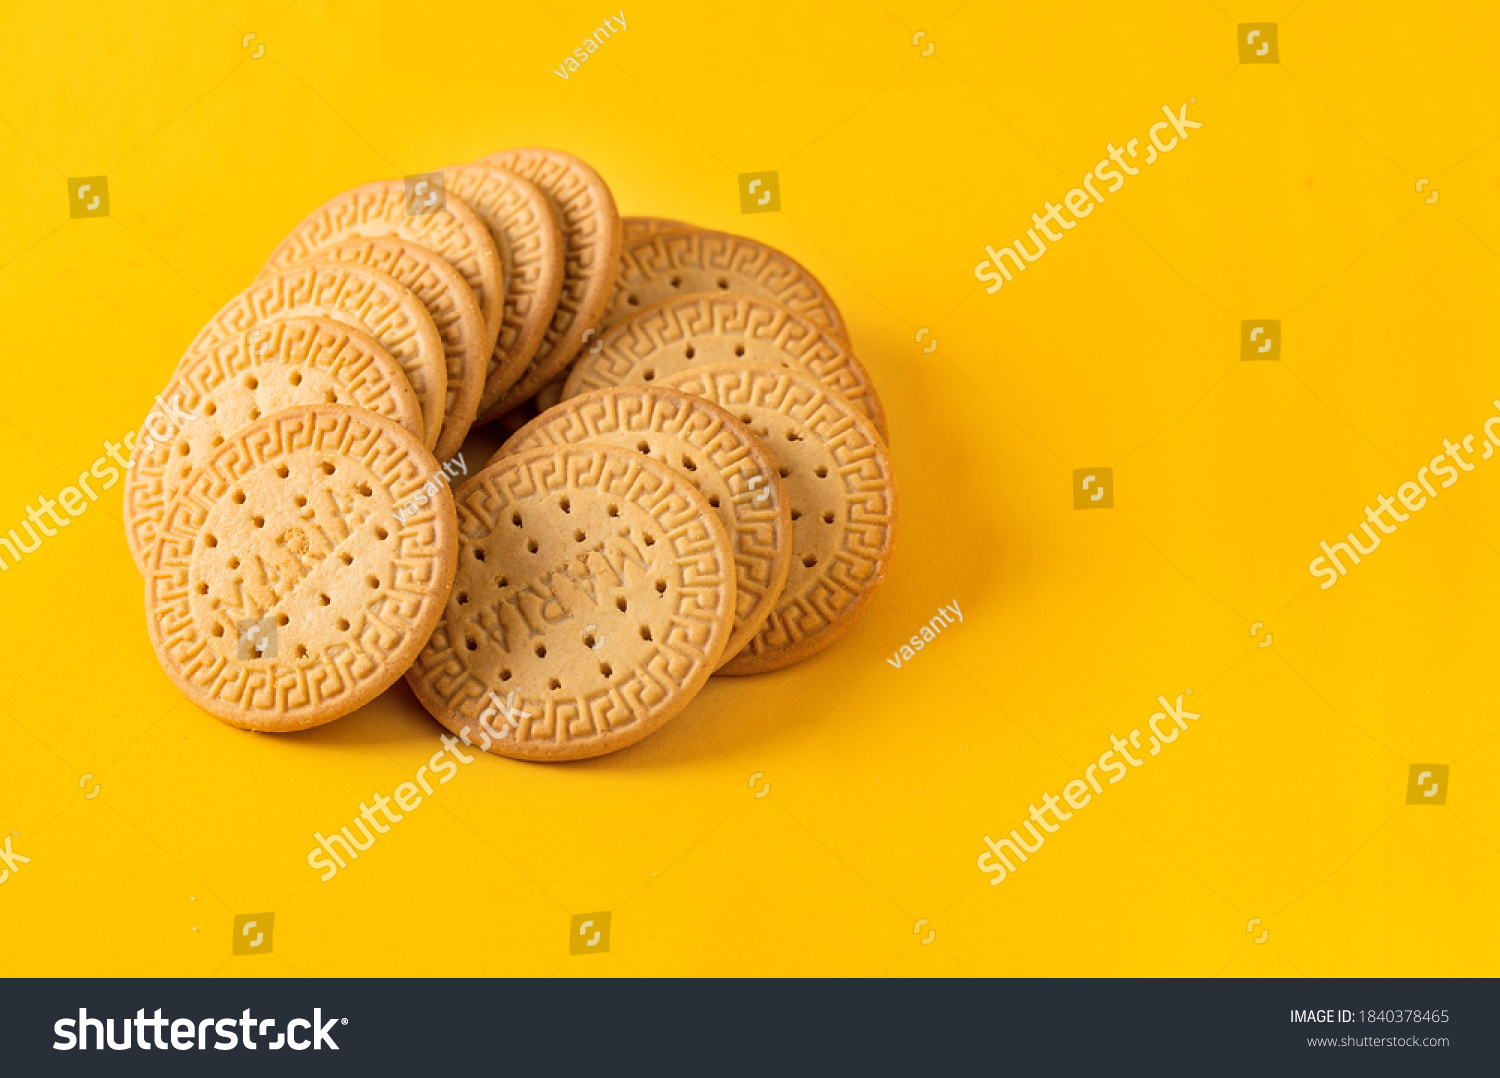 Many Marie biscuits  on bright yellow background. Modern cookies concept.  #1840378465